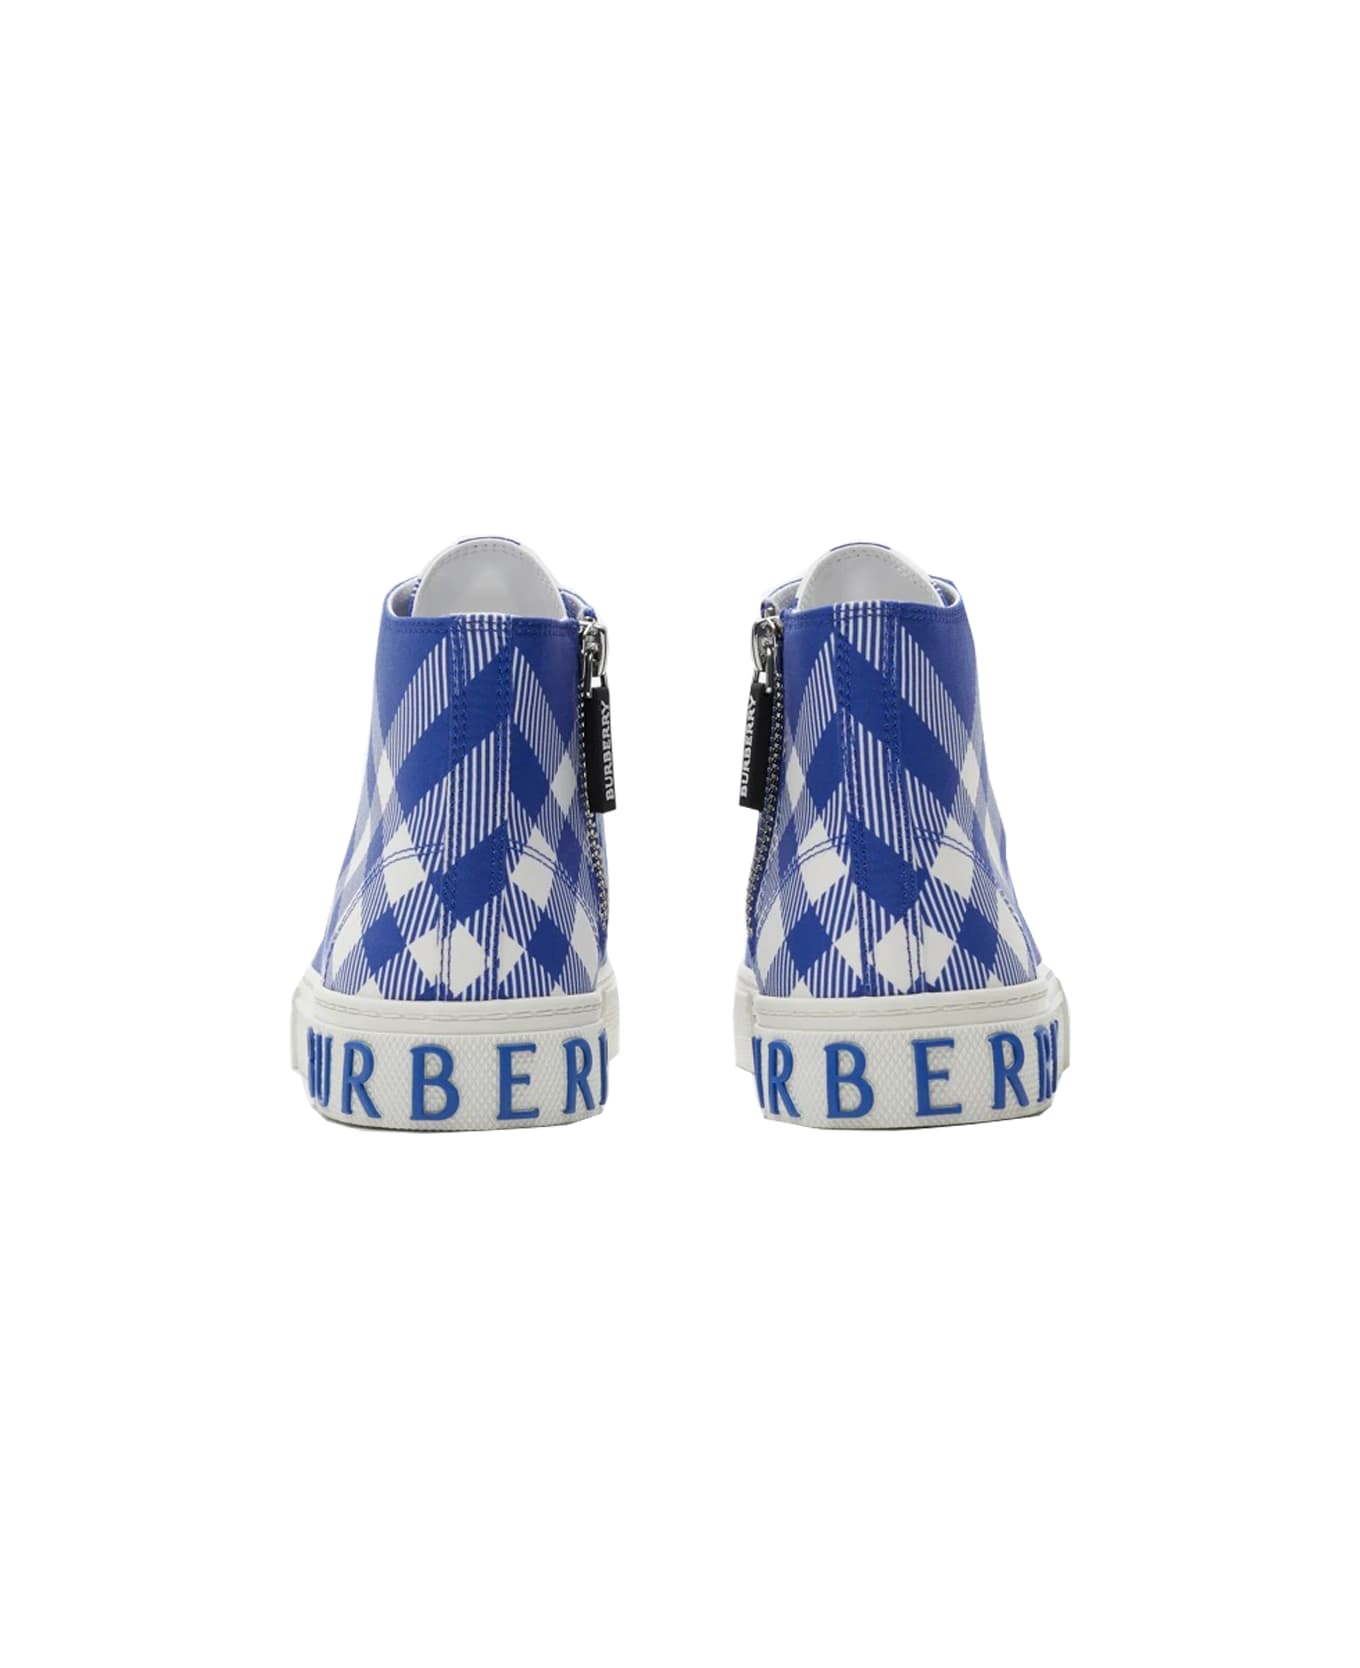 Burberry High Sneakers In Checked Cotton - Blue